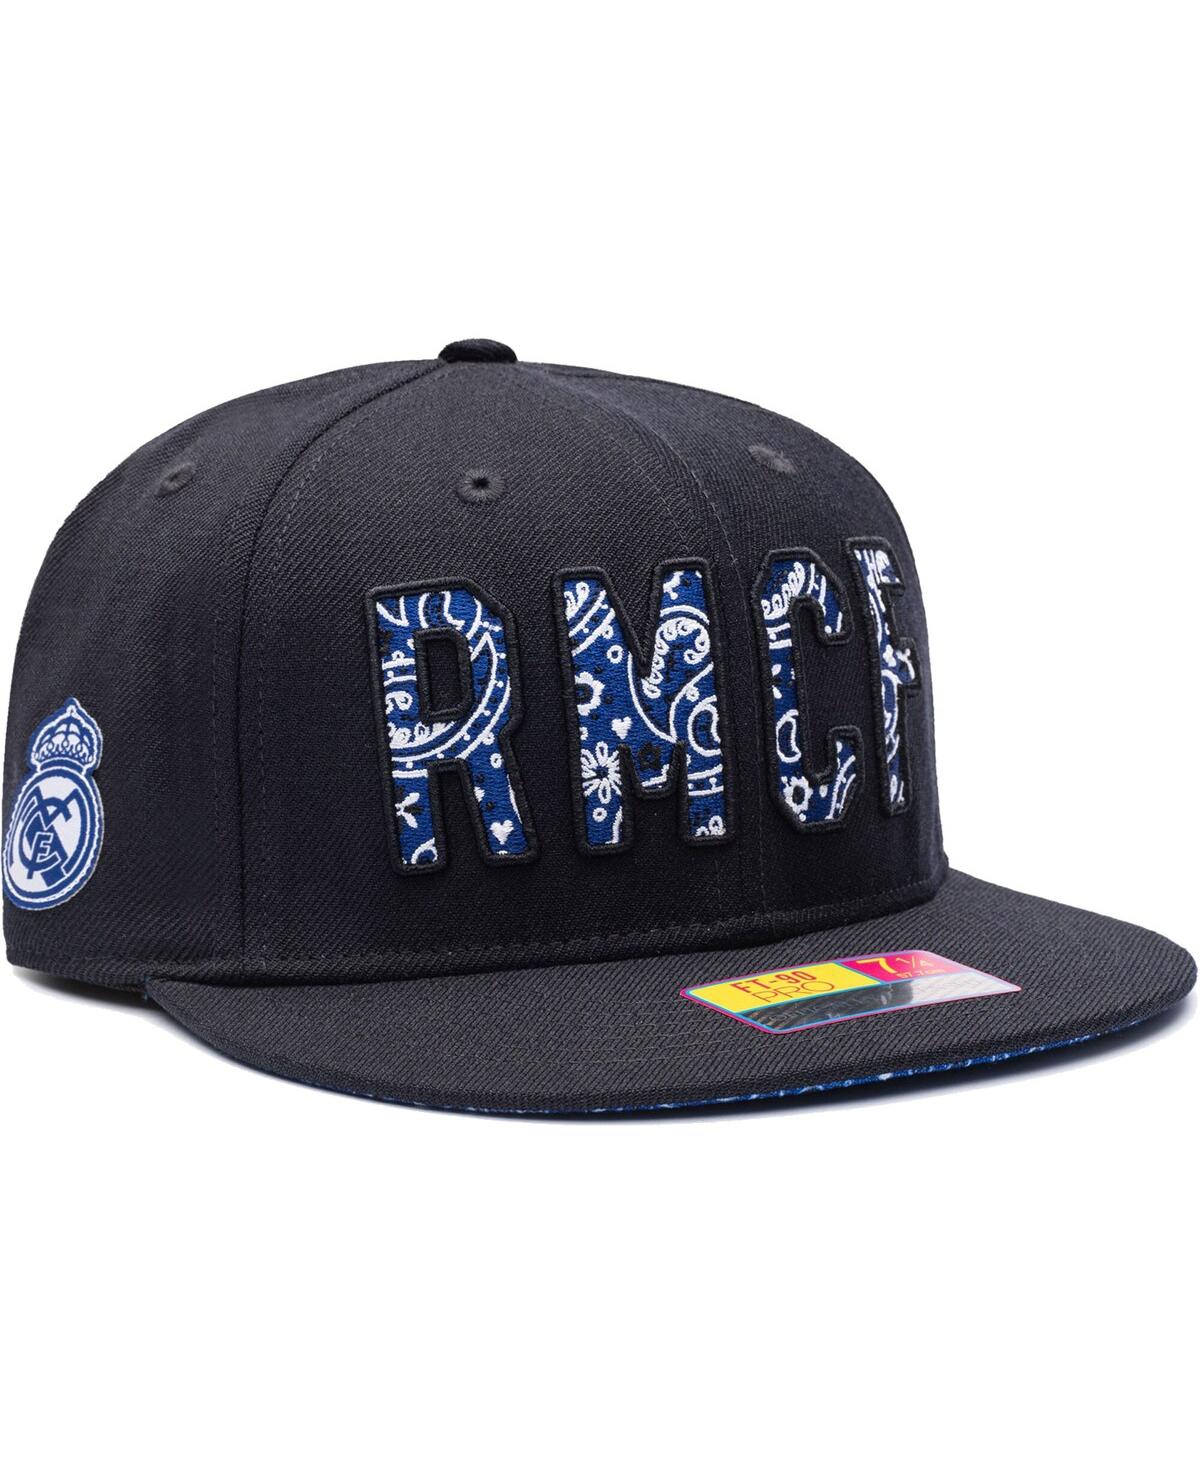 FAN INK MEN'S NAVY REAL MADRID BODE FITTED HAT